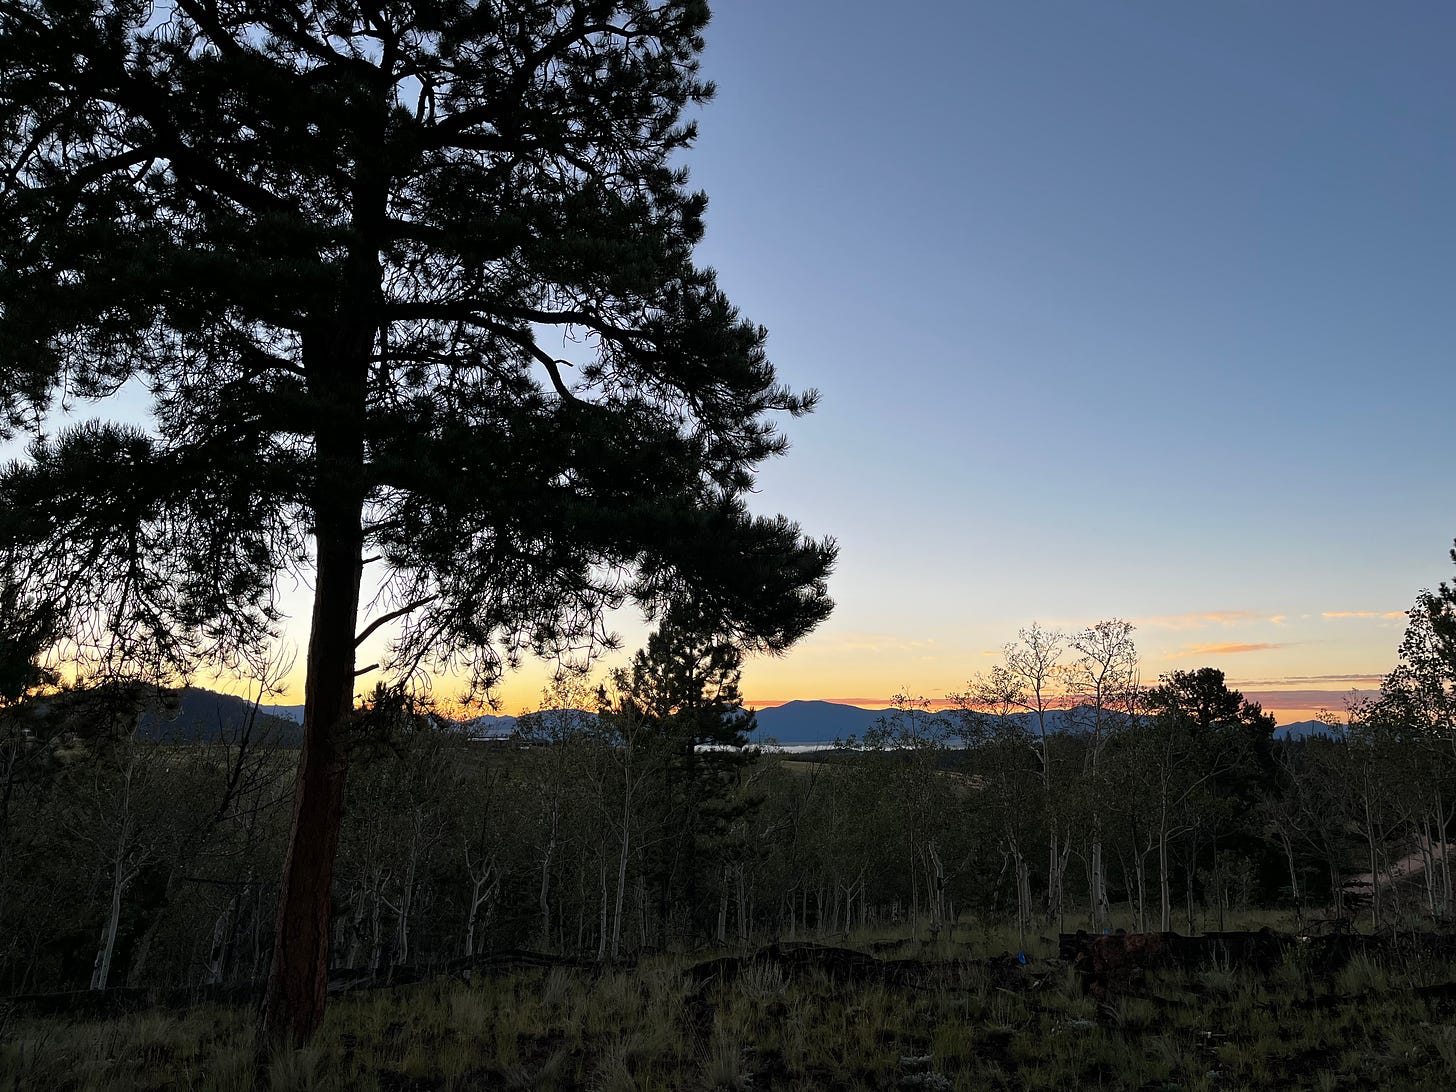 photo of a sunrise with a large evergreen tree in the foreground, mountains in the background, and a thin line of clouds between them